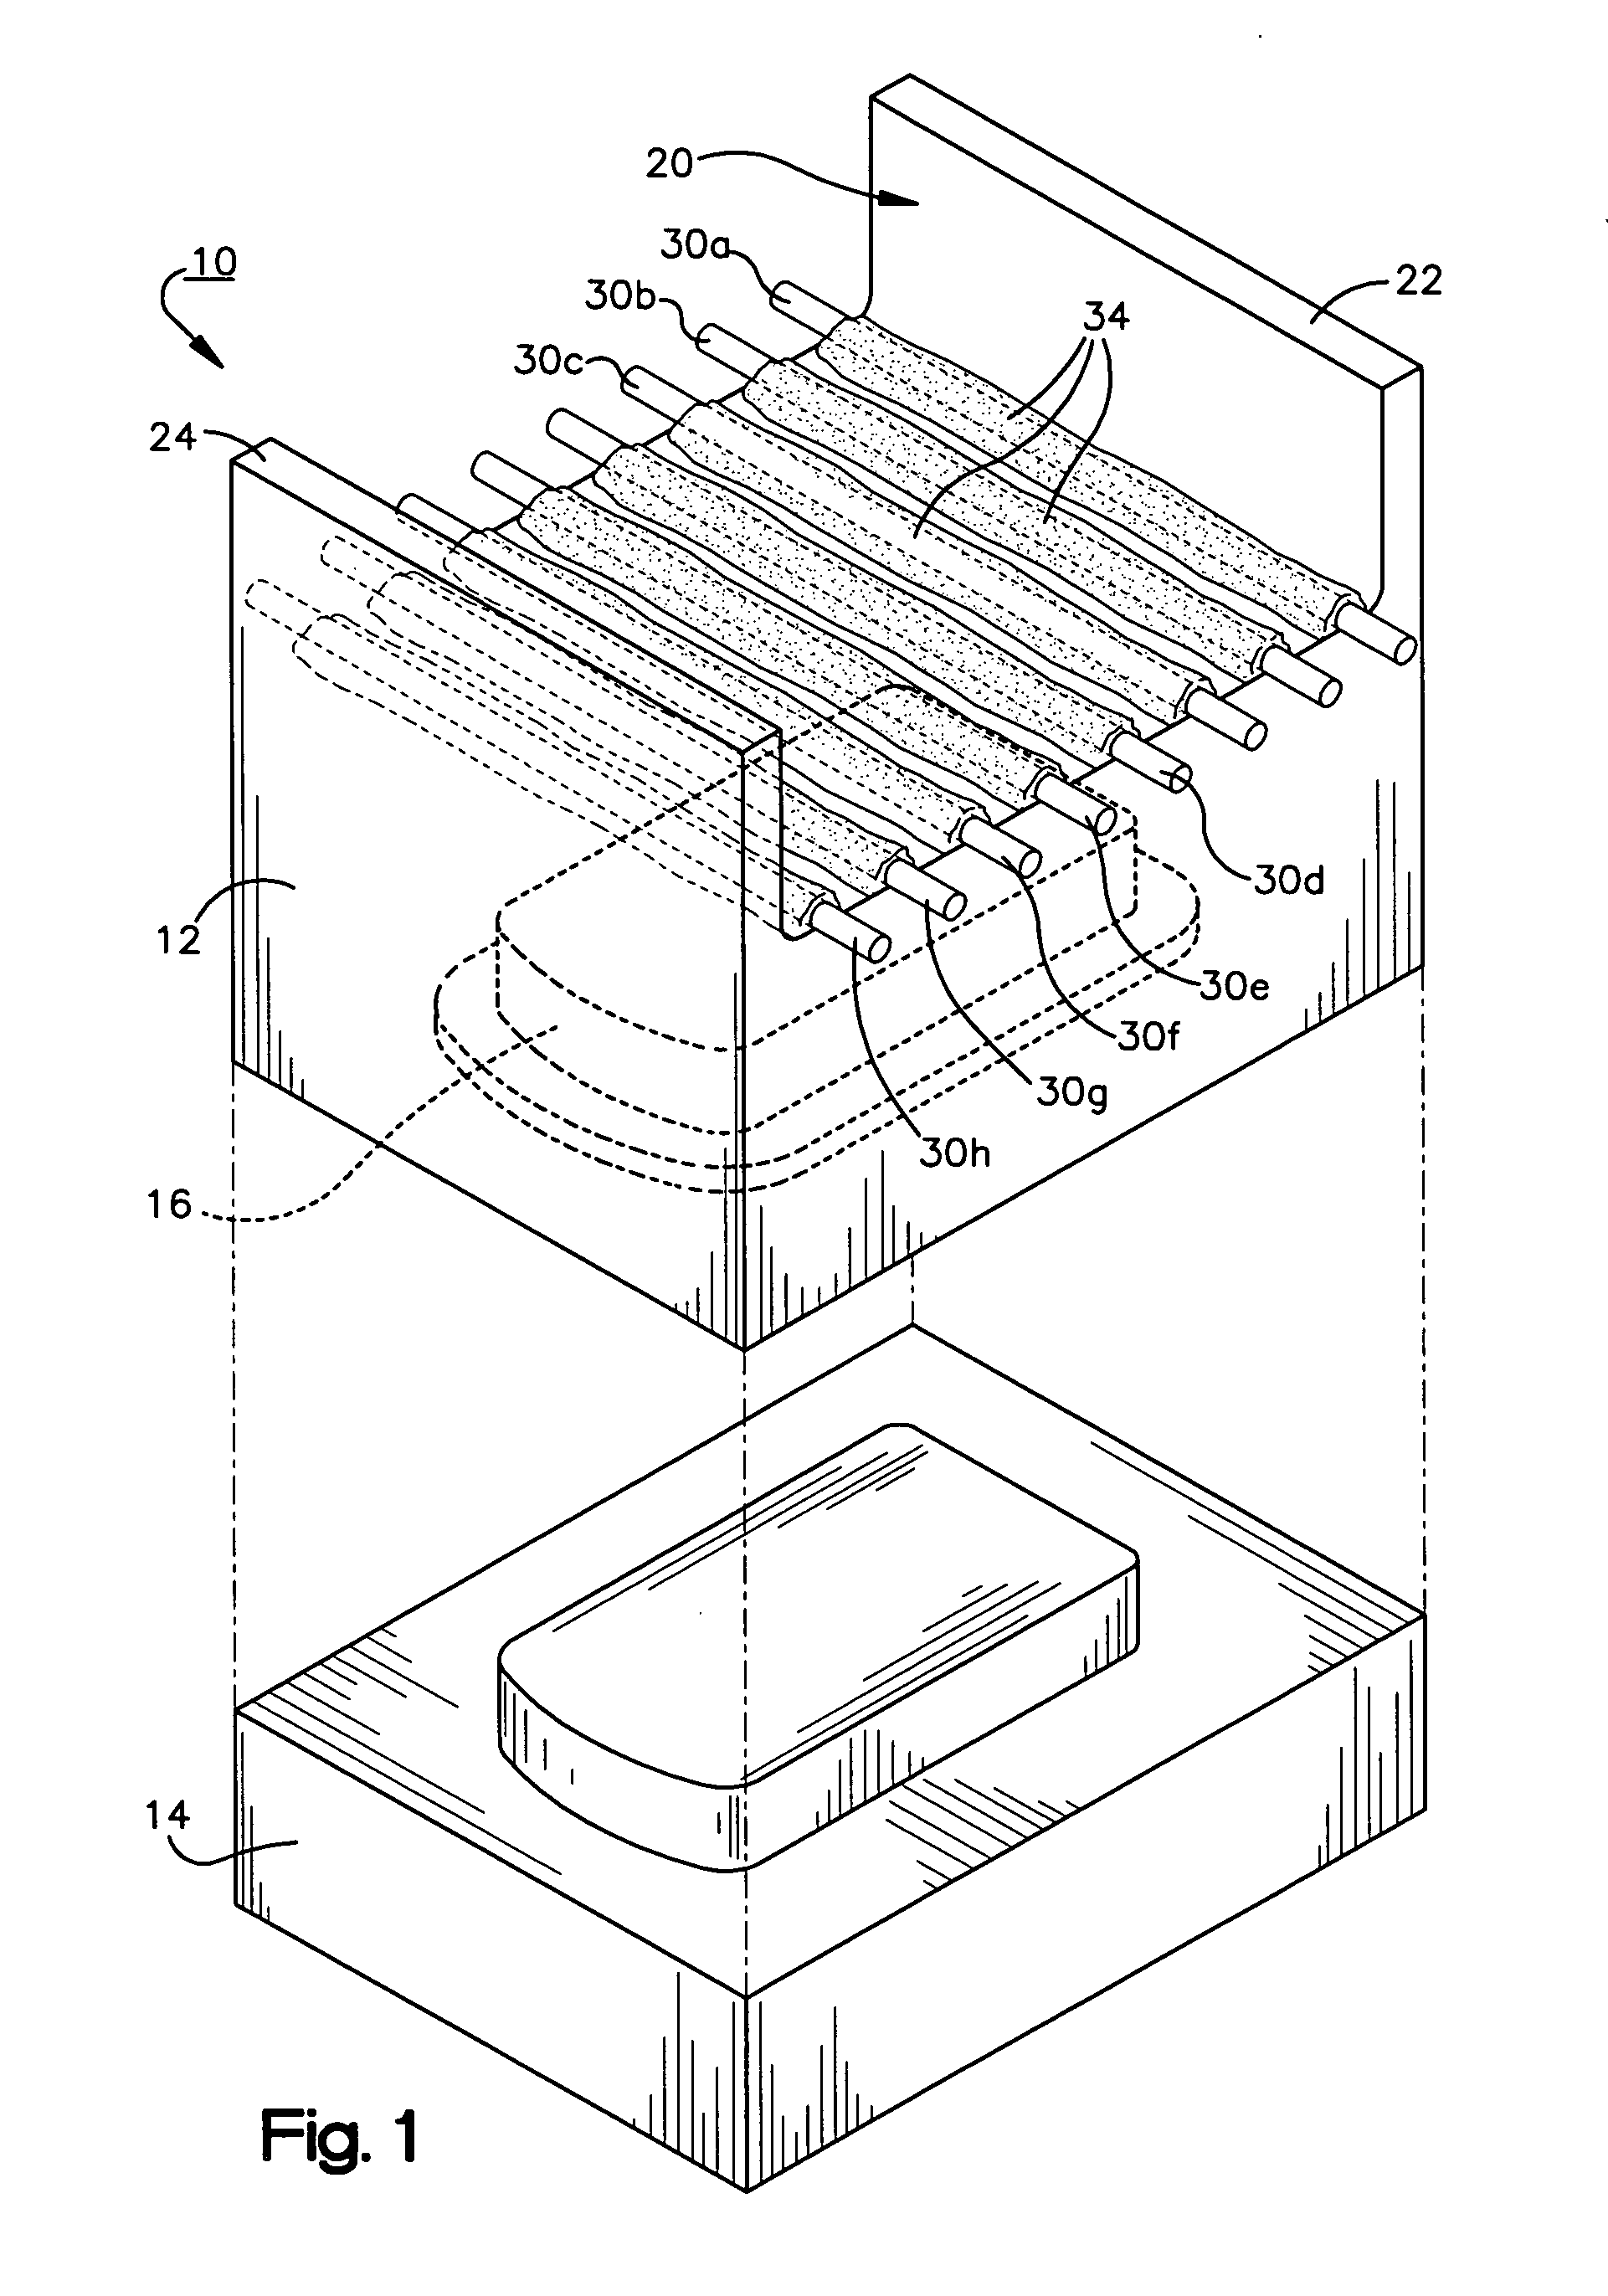 Heat transfer system for a mold